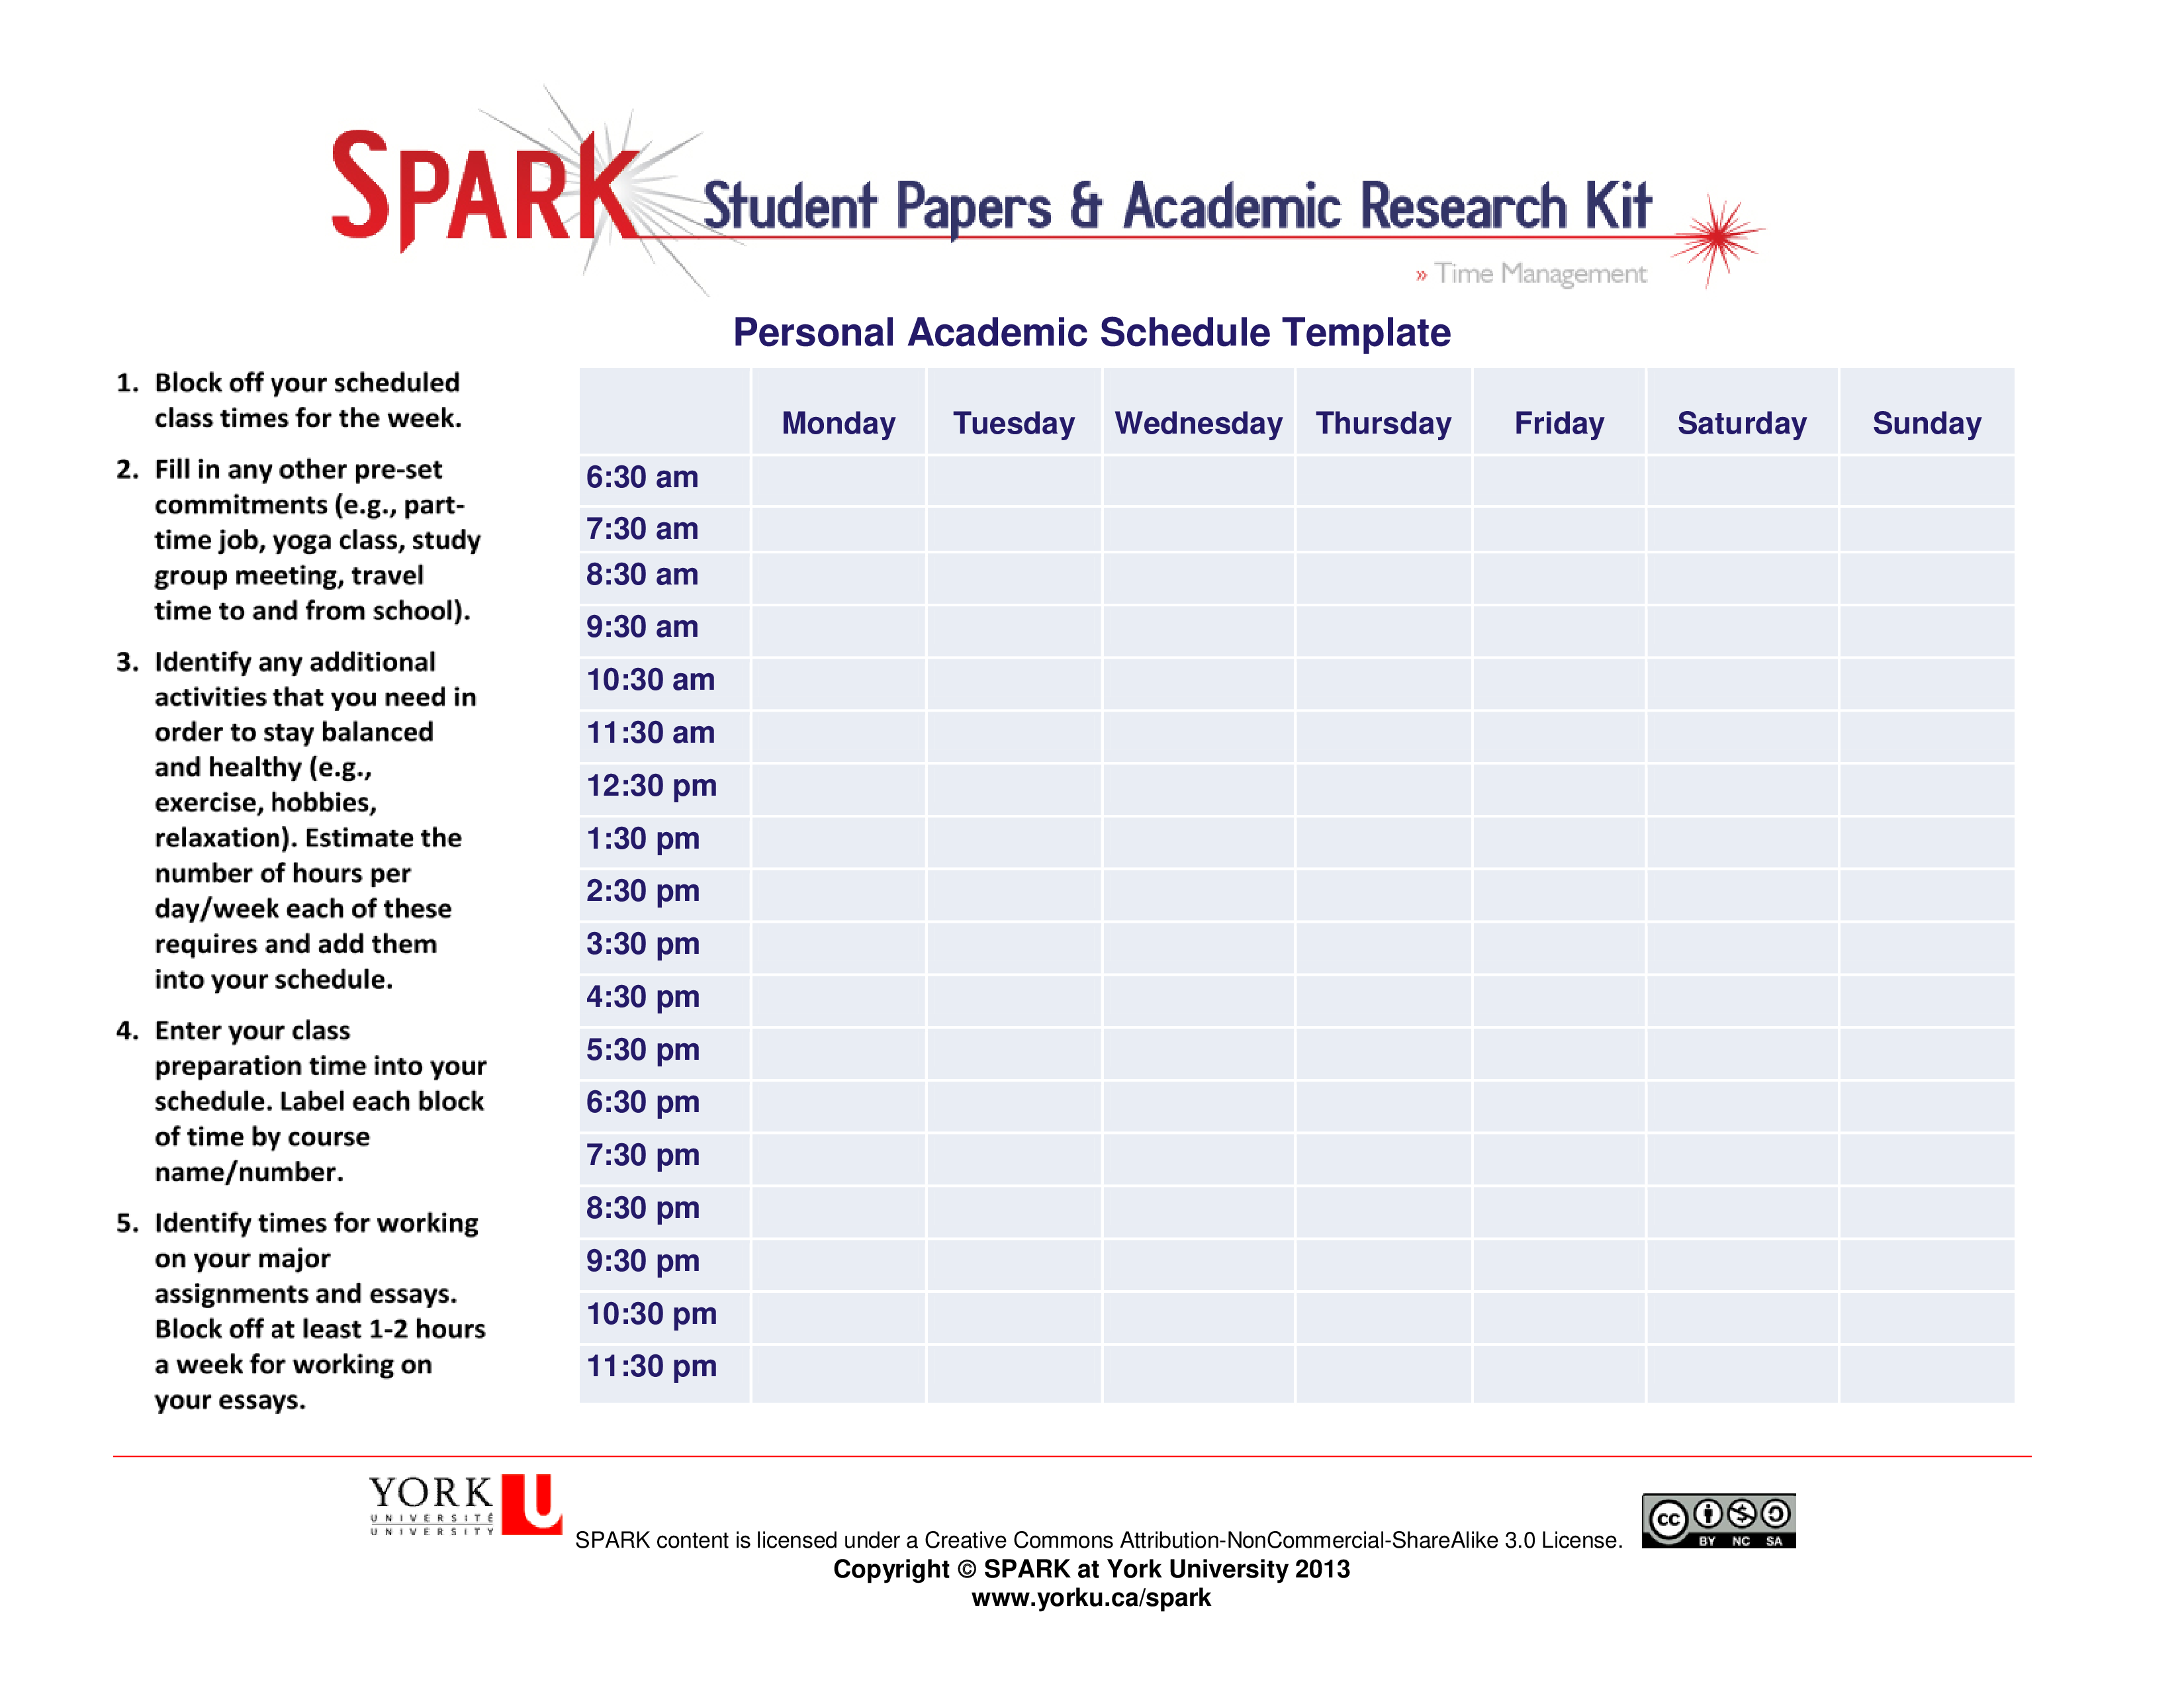 Personal Academic Schedule main image